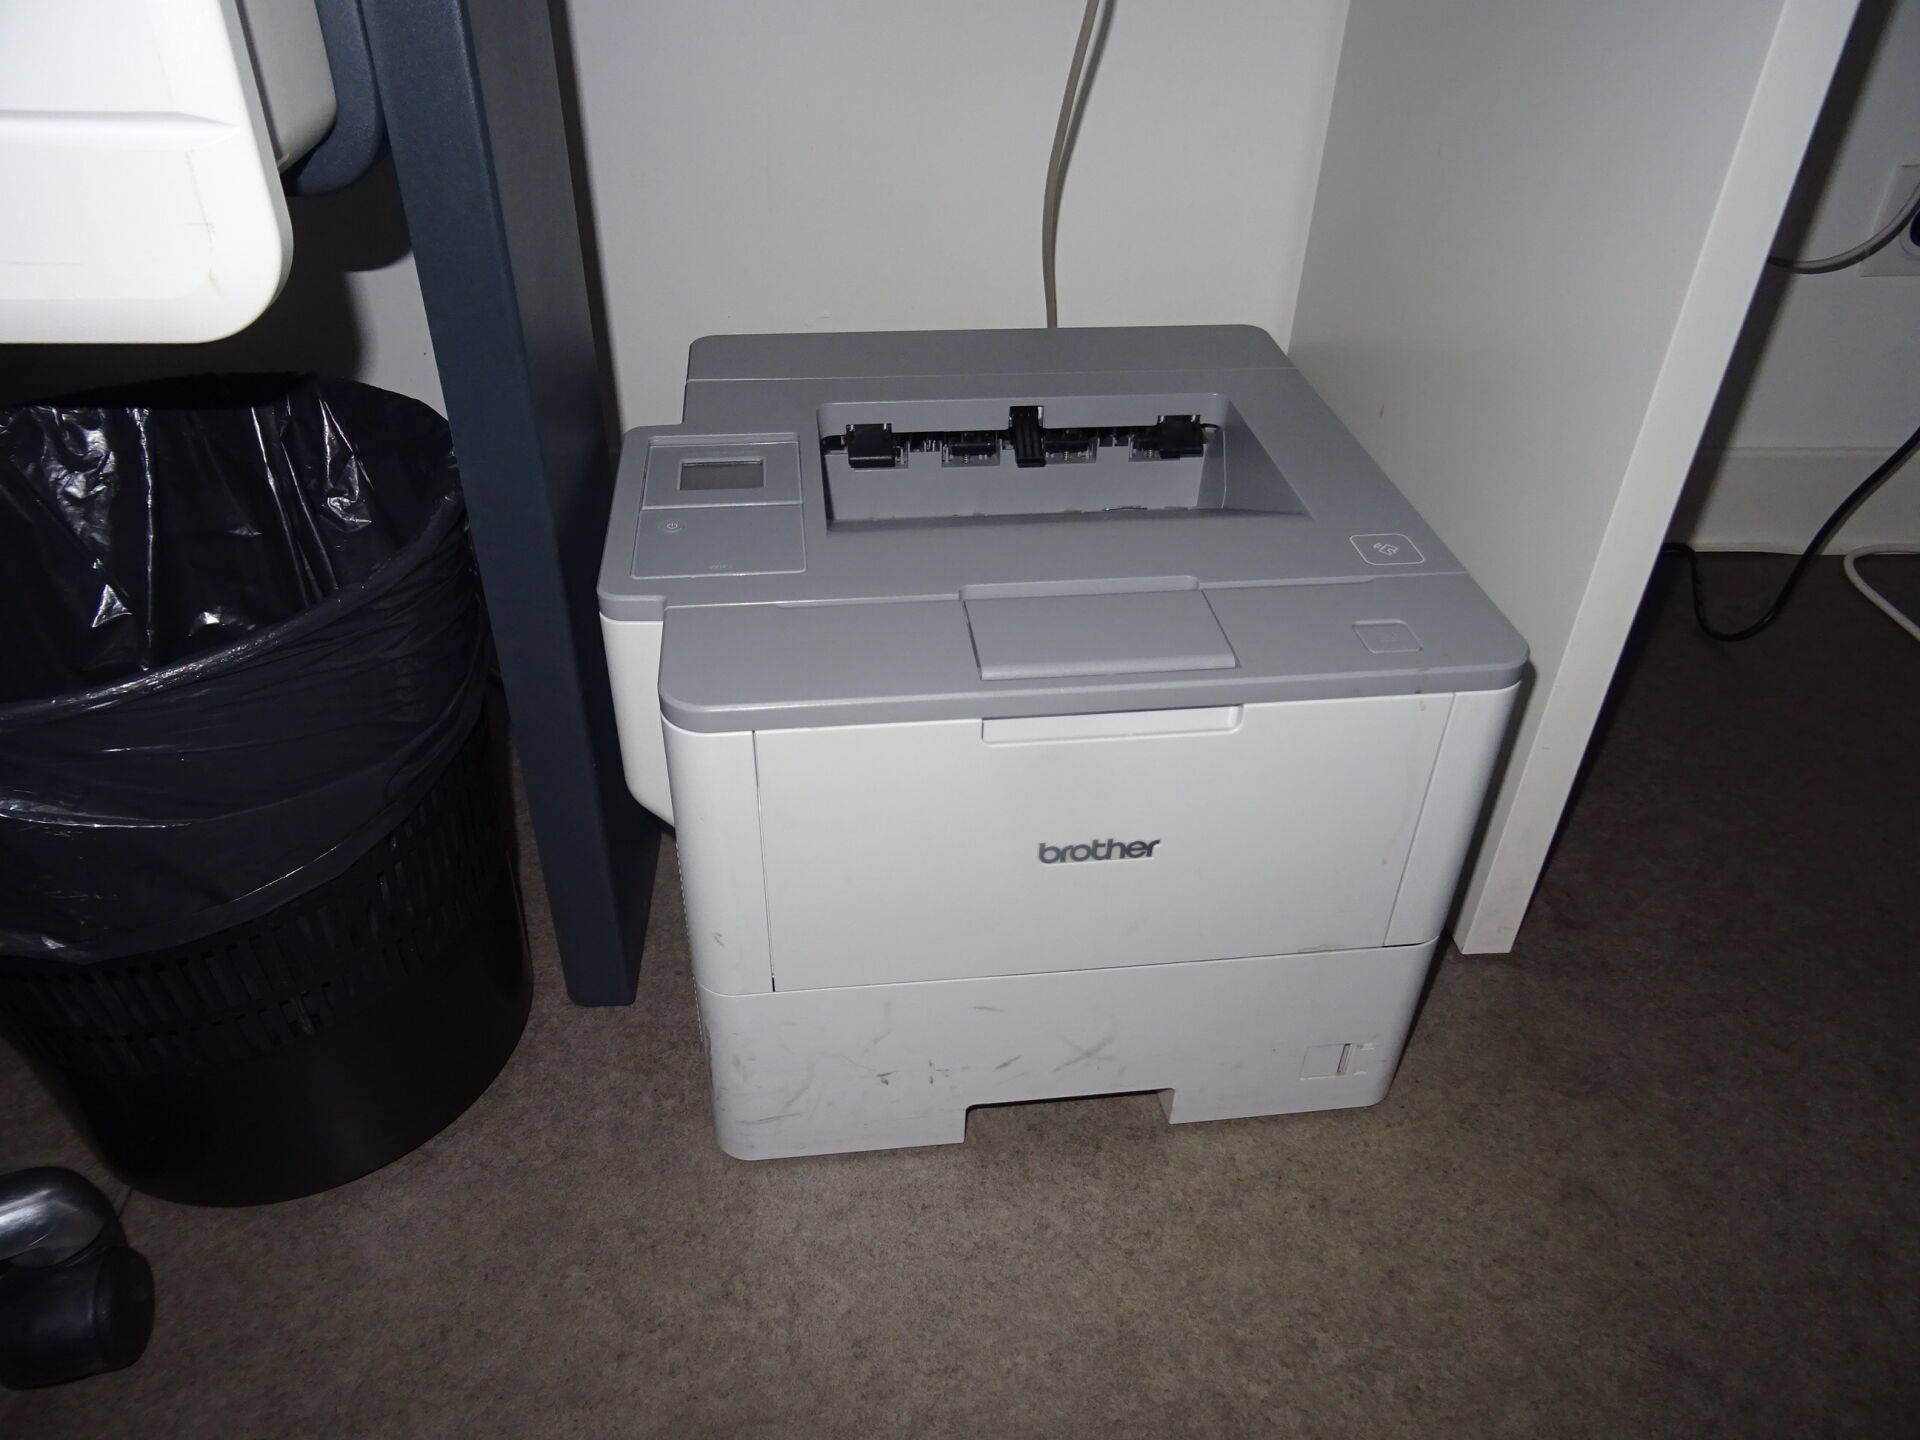 Null 1 Brother HL6400 printer